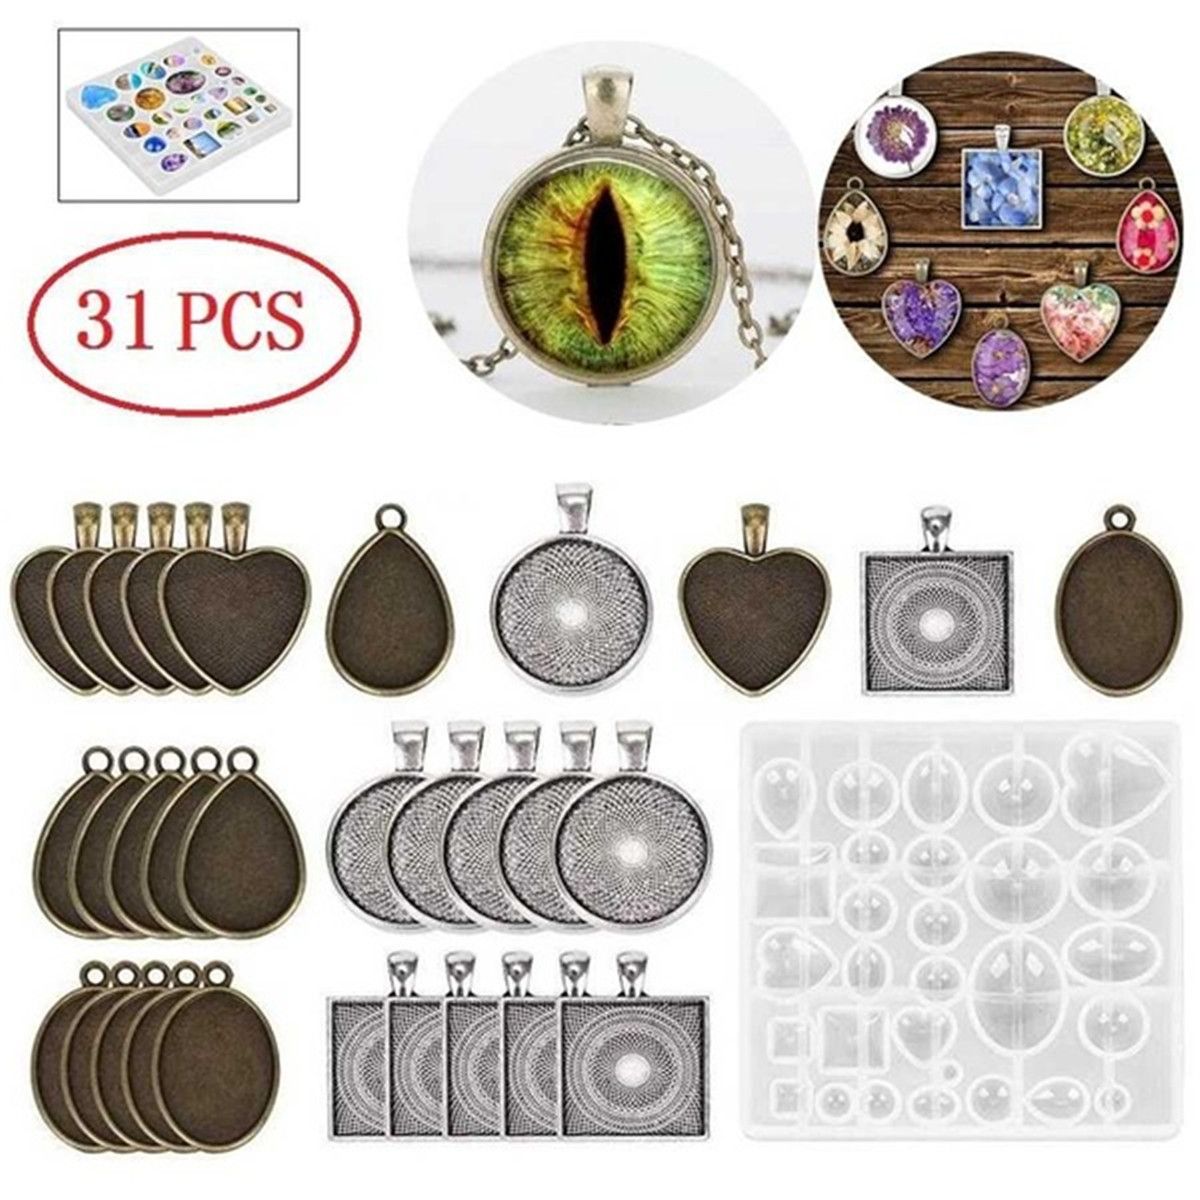 31pcs-Resin-Casting-Molds-Kit-Silicone-Mold-Jewelry-Making-Pendant-DIY-Mould-Set-1685771